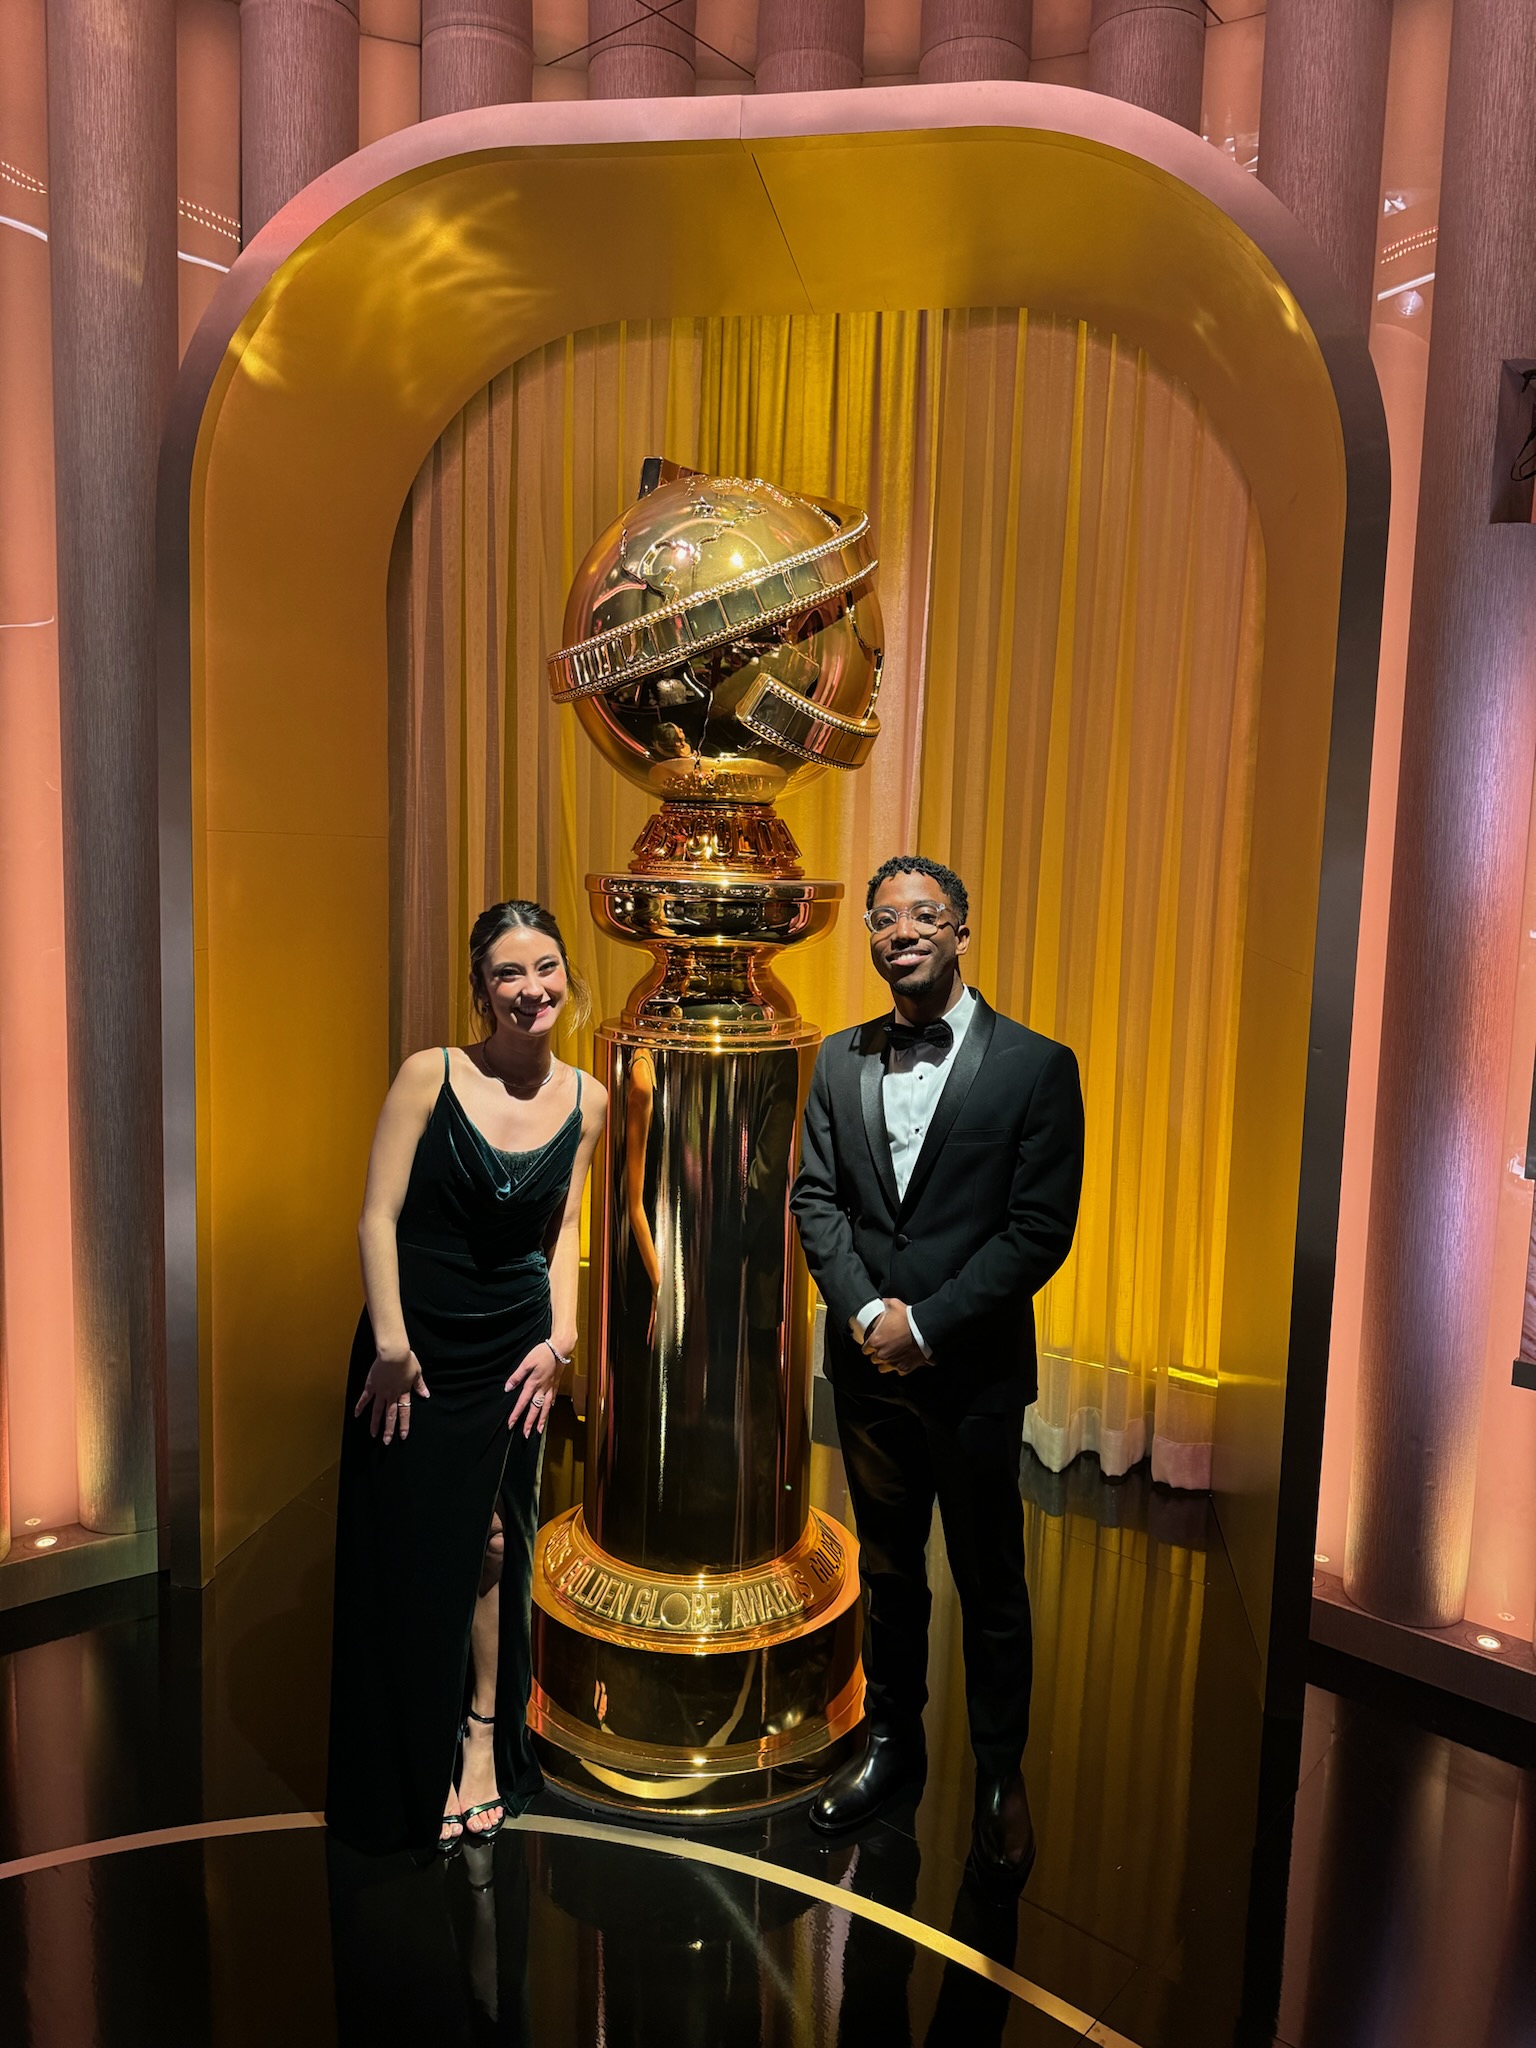 Elardo and Marshall with the Golden Globes statue at the awards ceremony.